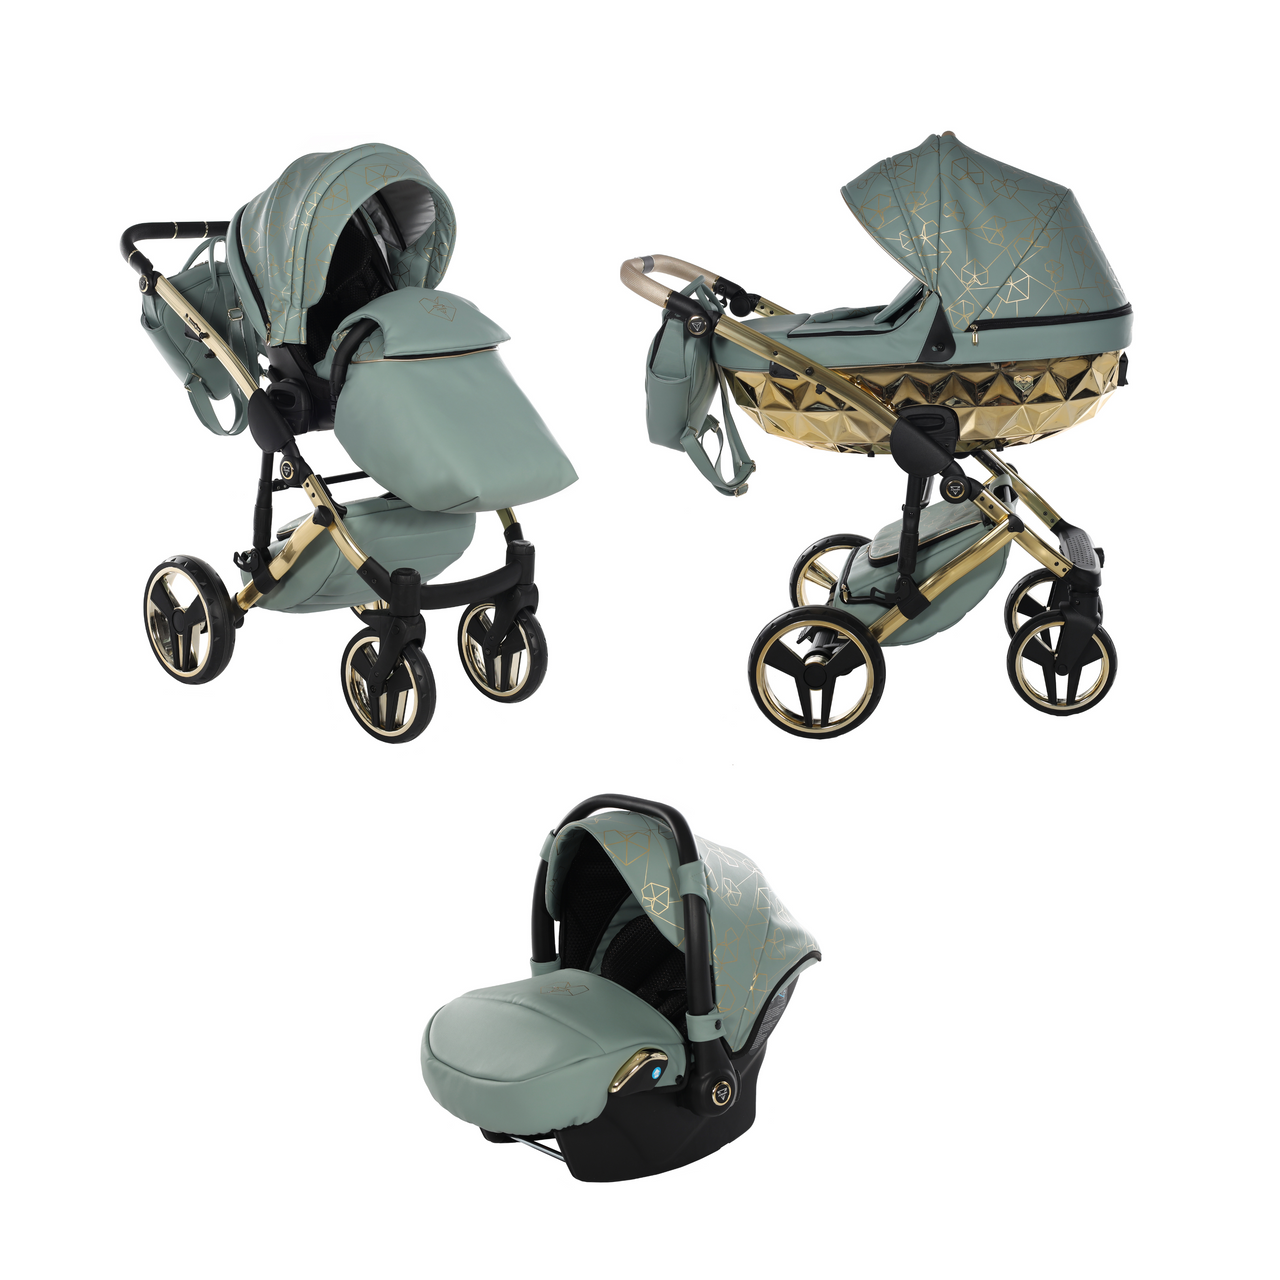 Junama Heart 3 In 1 Travel System - Green - For Your Little One